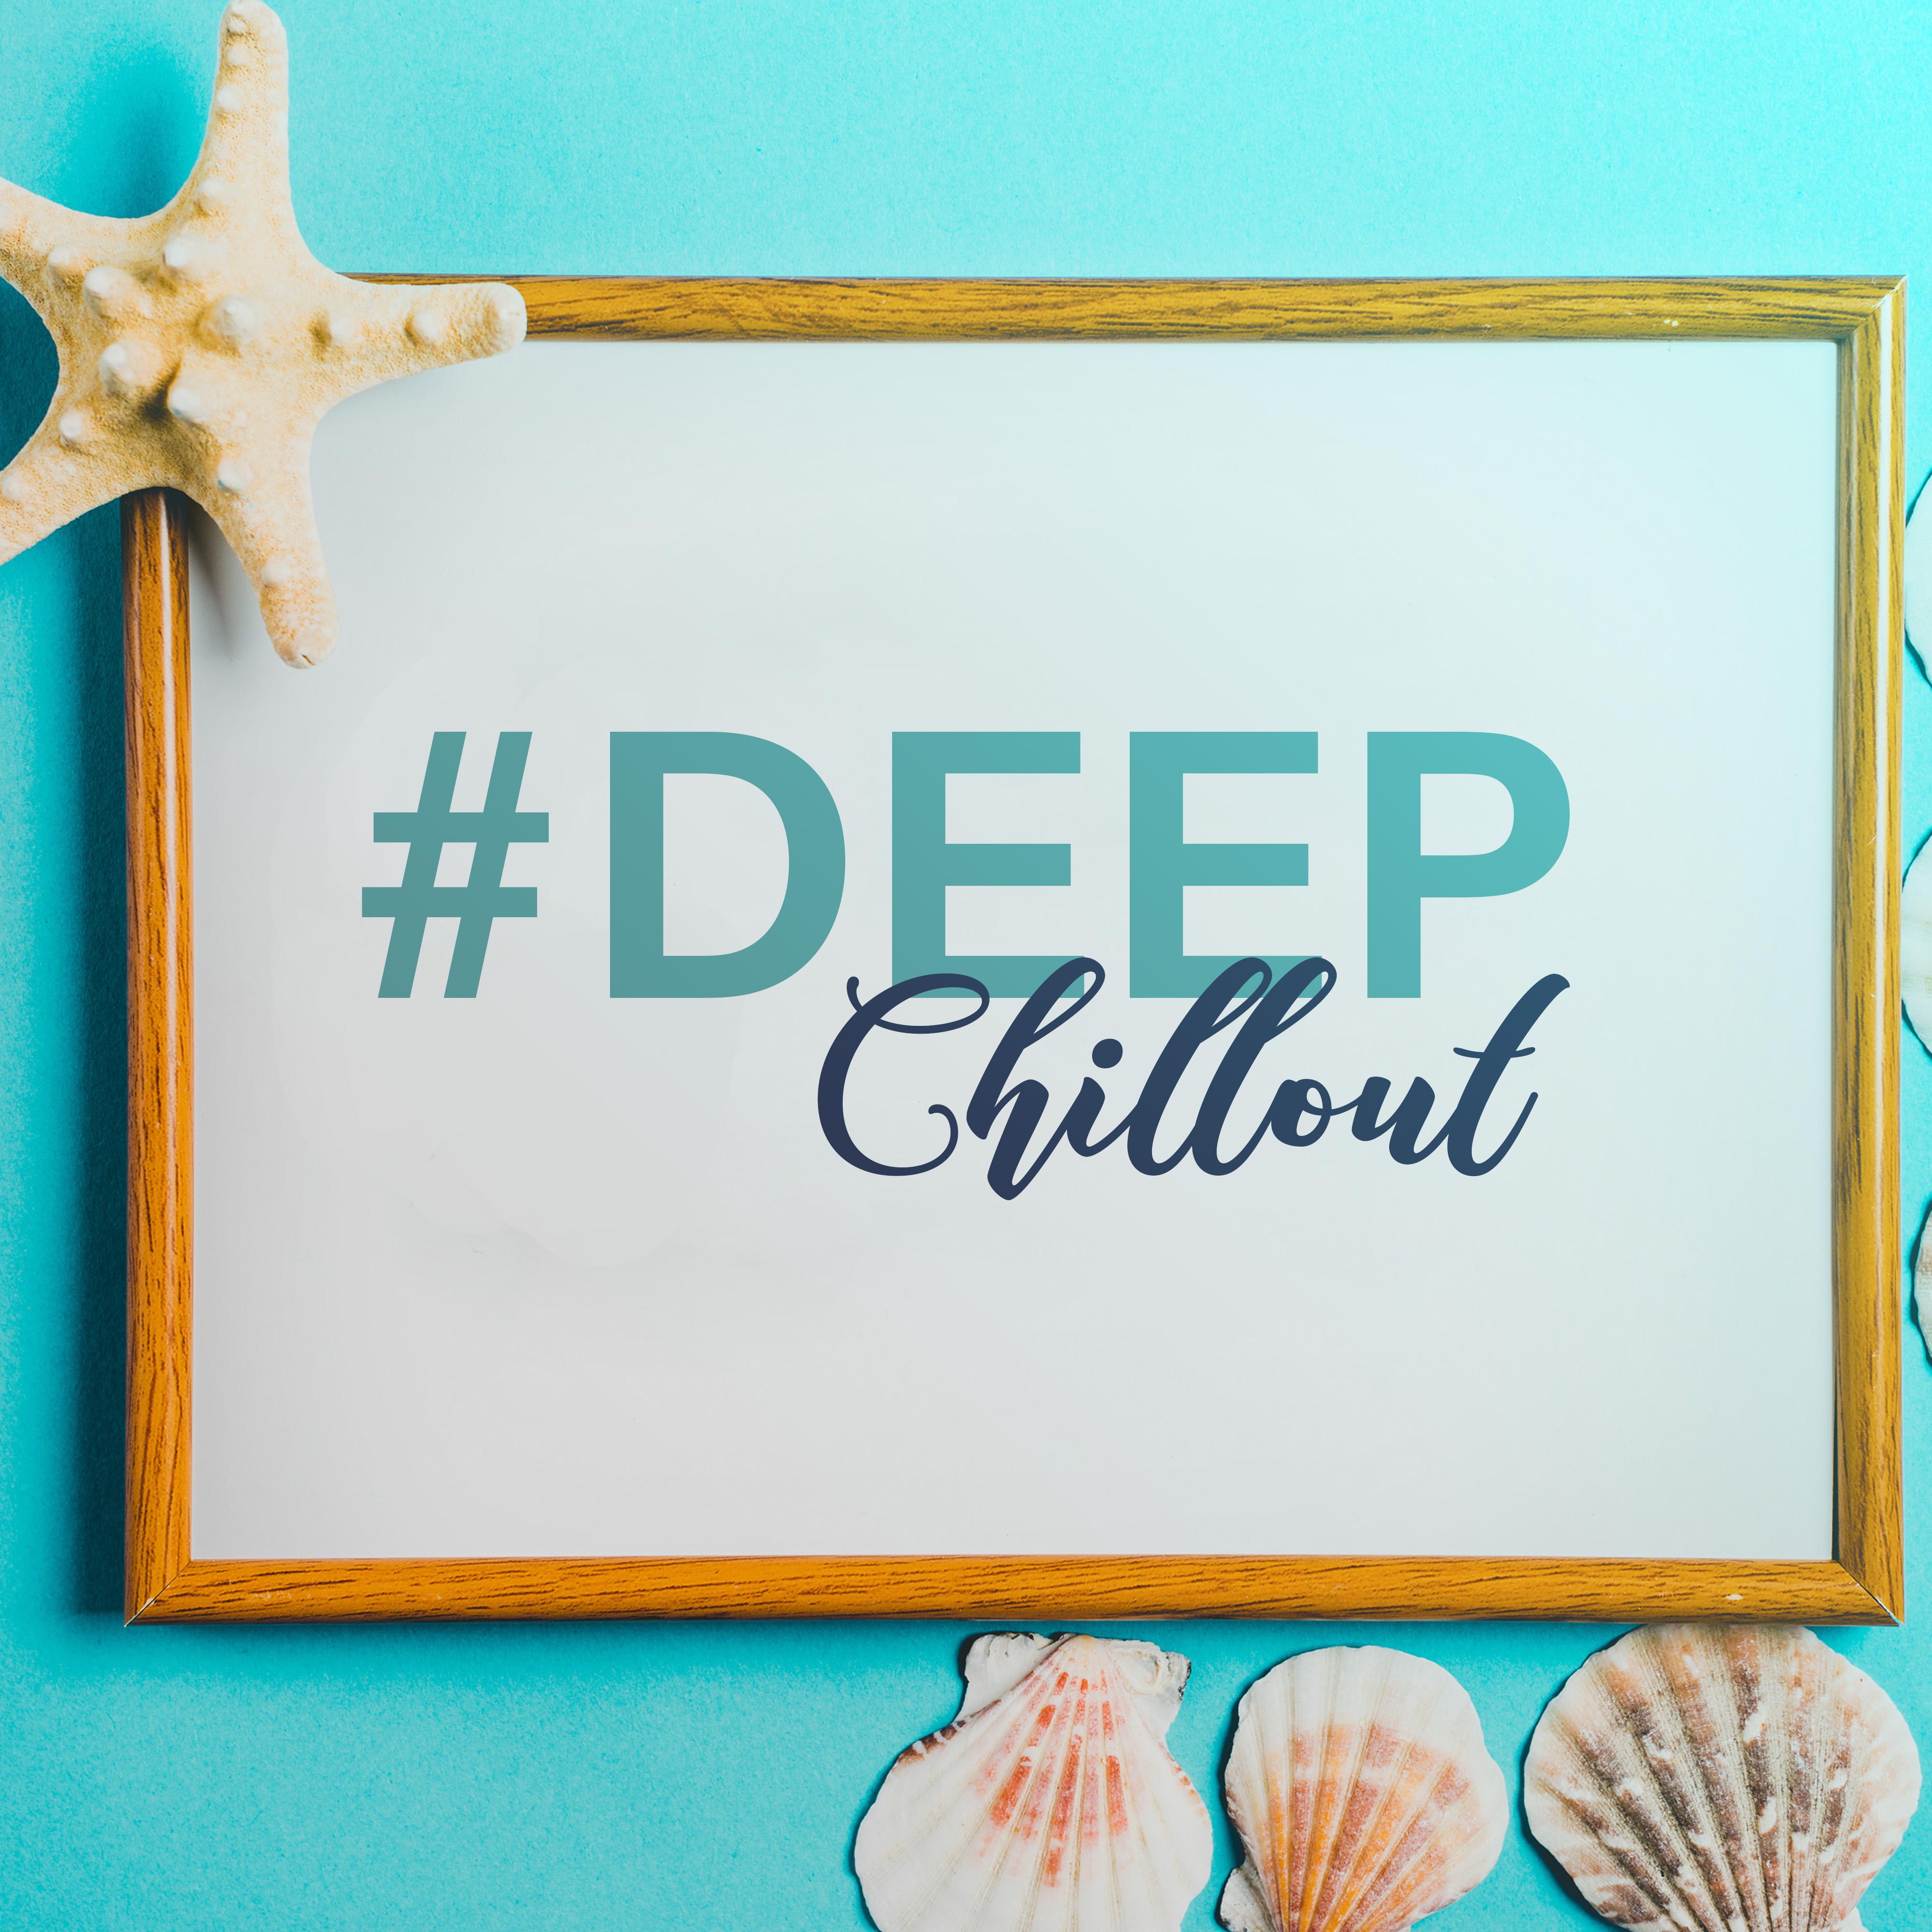 #Deep Chillout